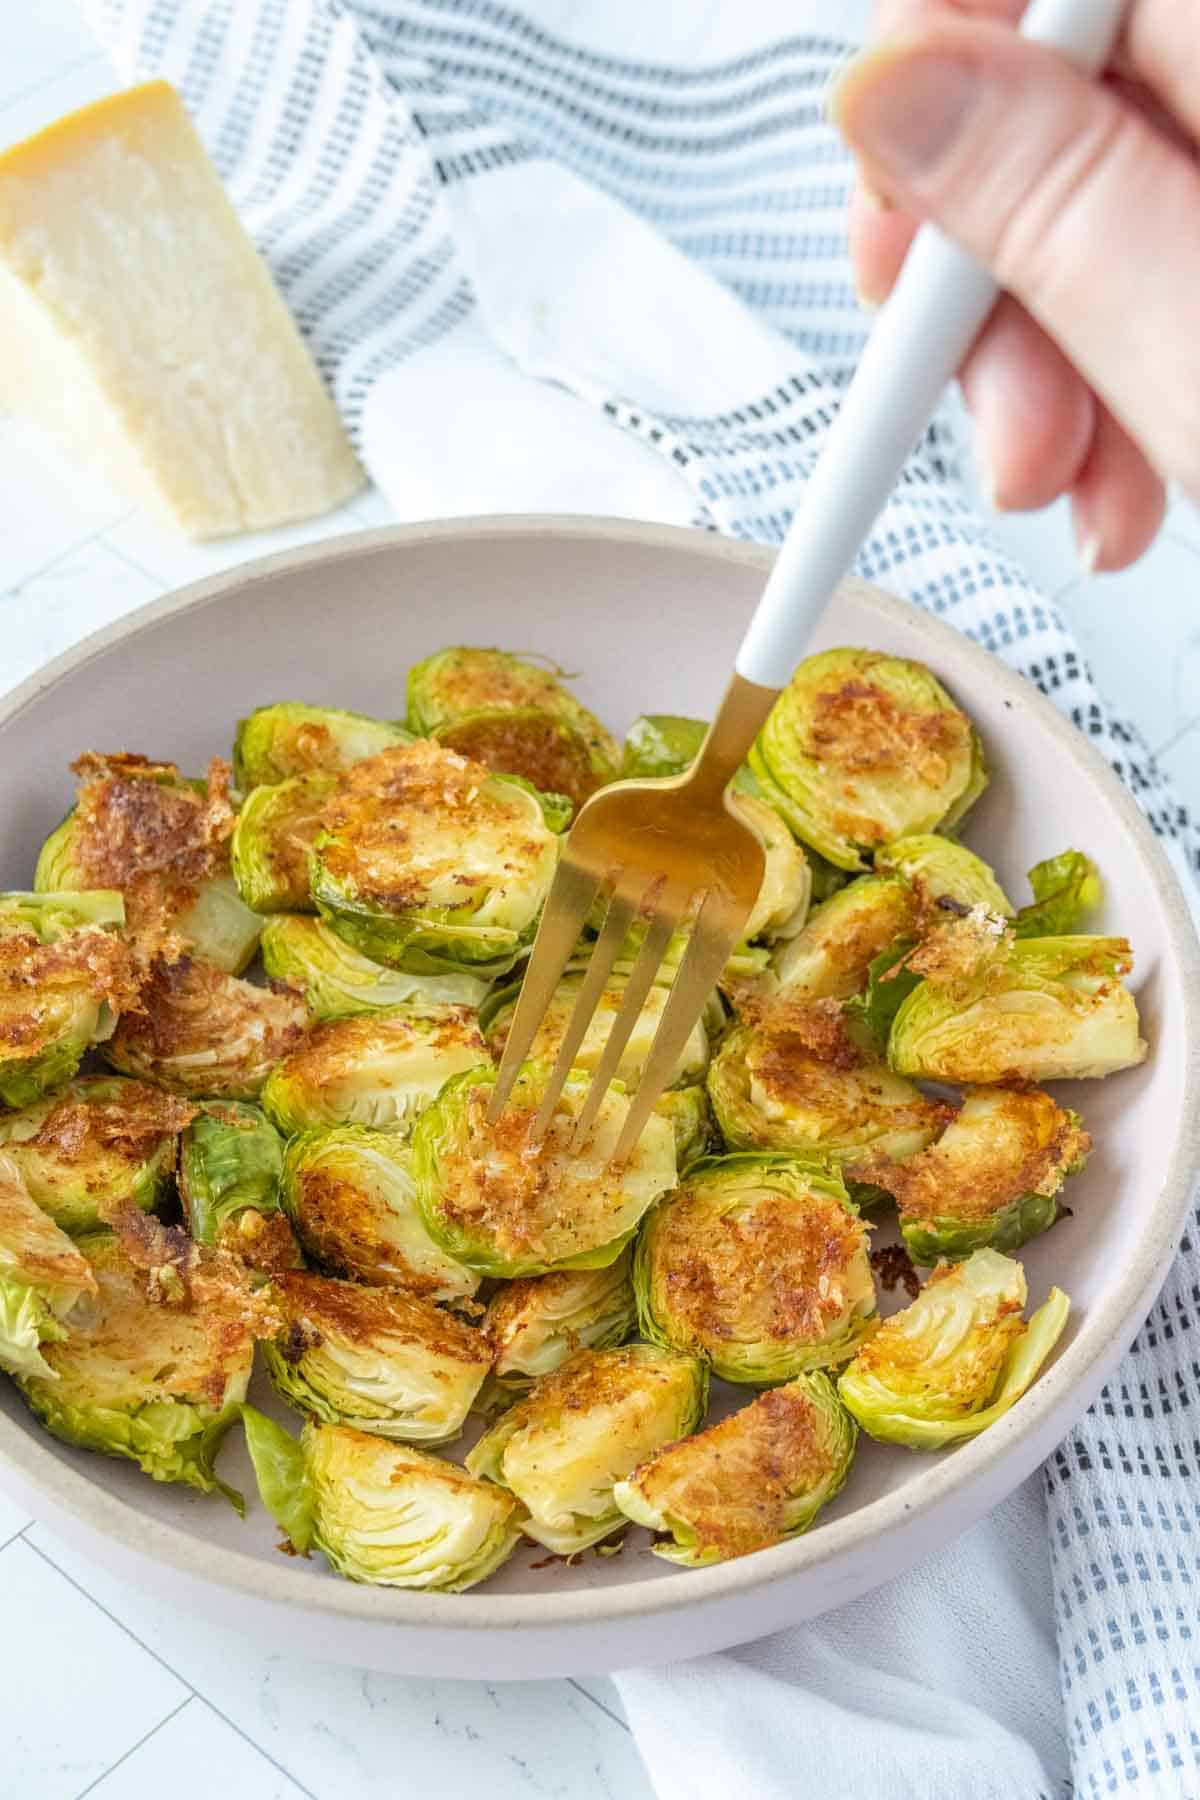 Brussels sprouts on a plate with a fork.